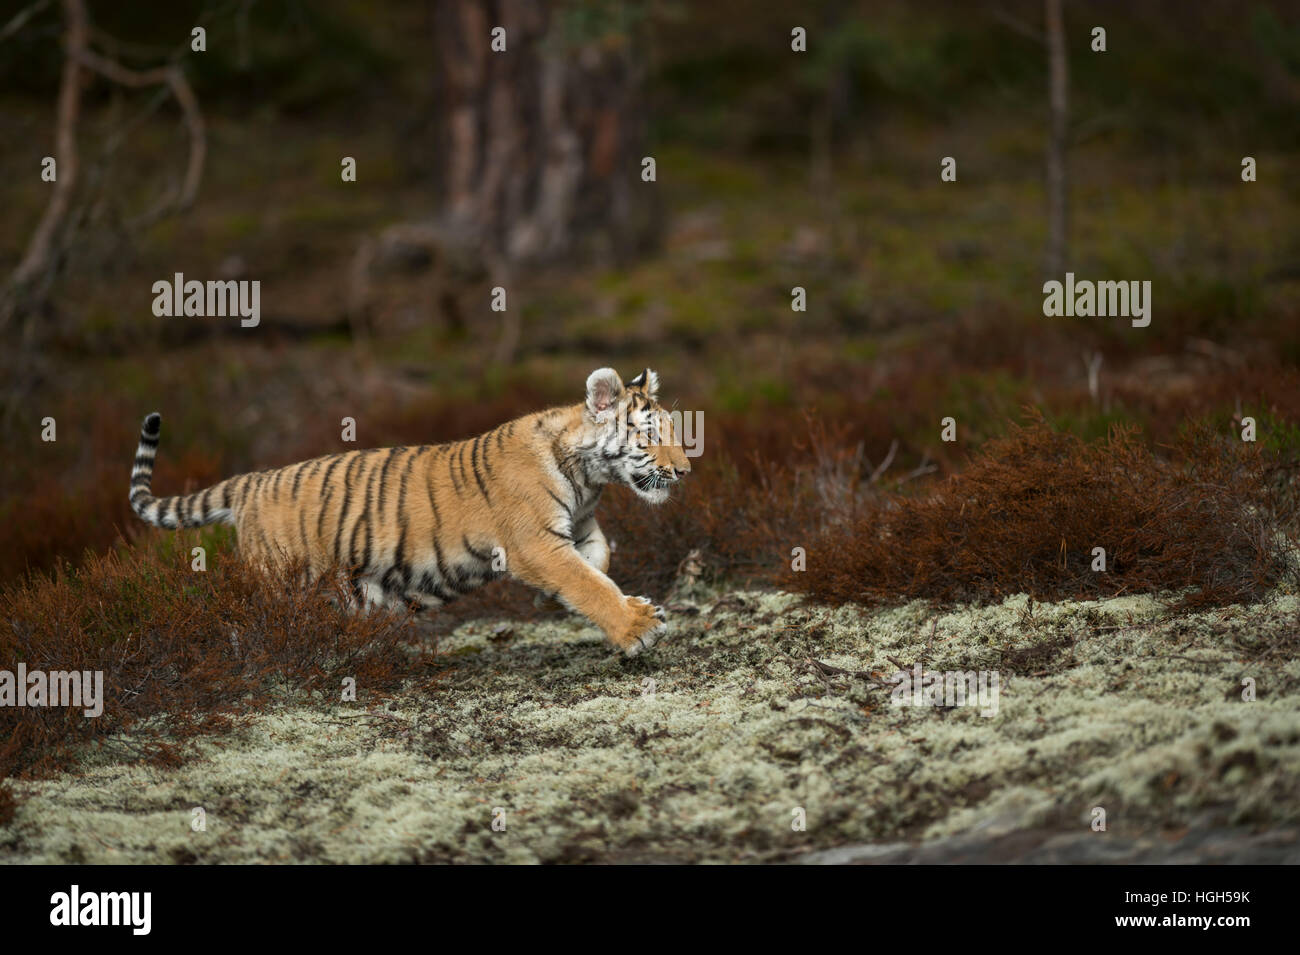 Royal Bengal Tiger / Koenigstiger ( Panthera tigris ), through undergrowth, jumping, passing a clearing, in a hurry. Stock Photo